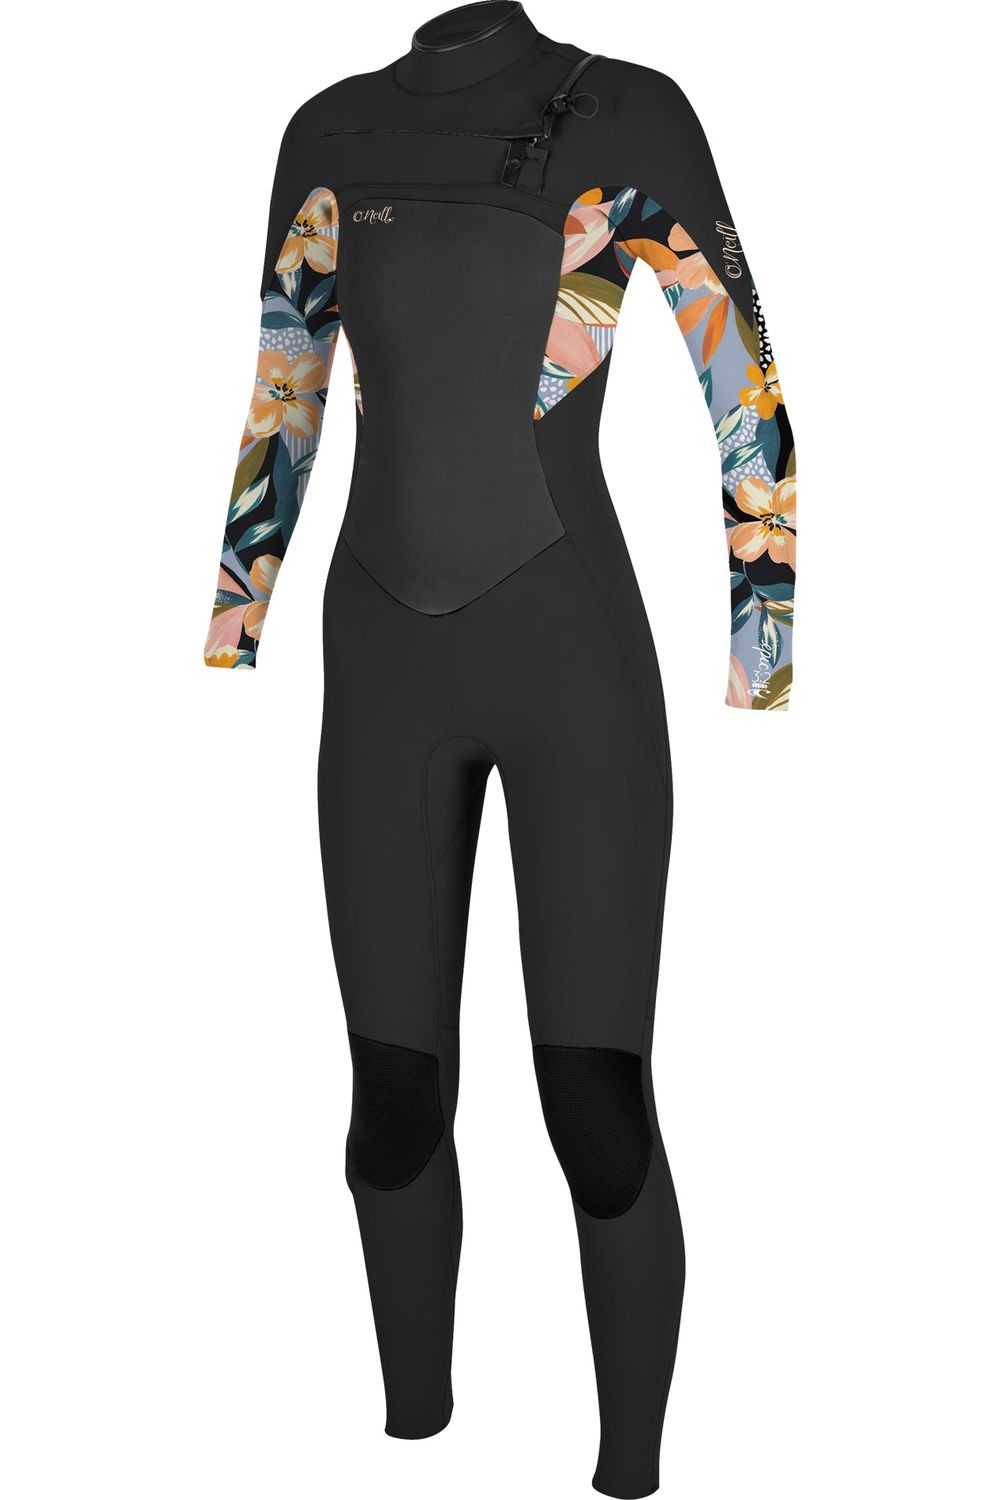 O'Neill Epic Women's 3/2 Wetsuit With Chest Zip In Black & Demiflor